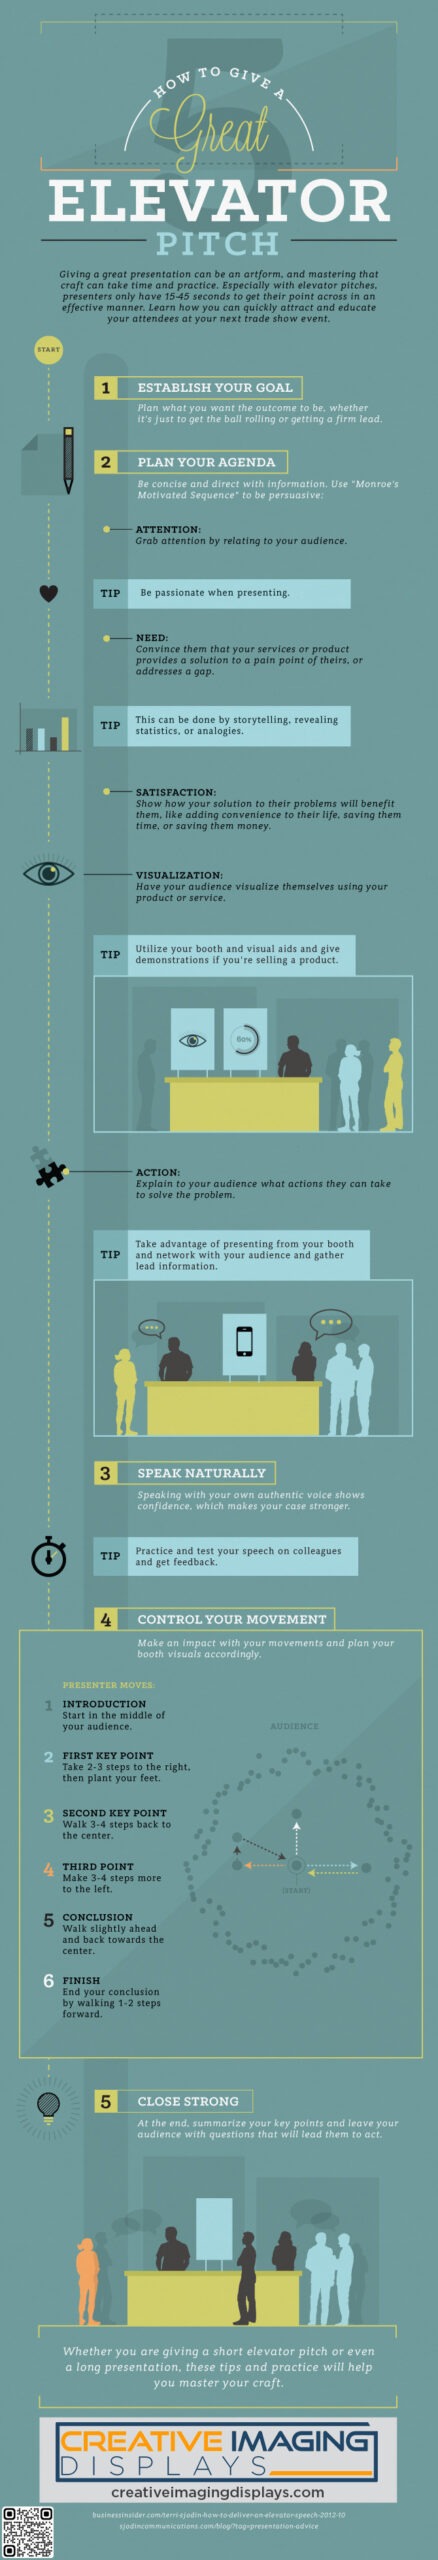 How to Give a Great Elevator Pitch - Infographic